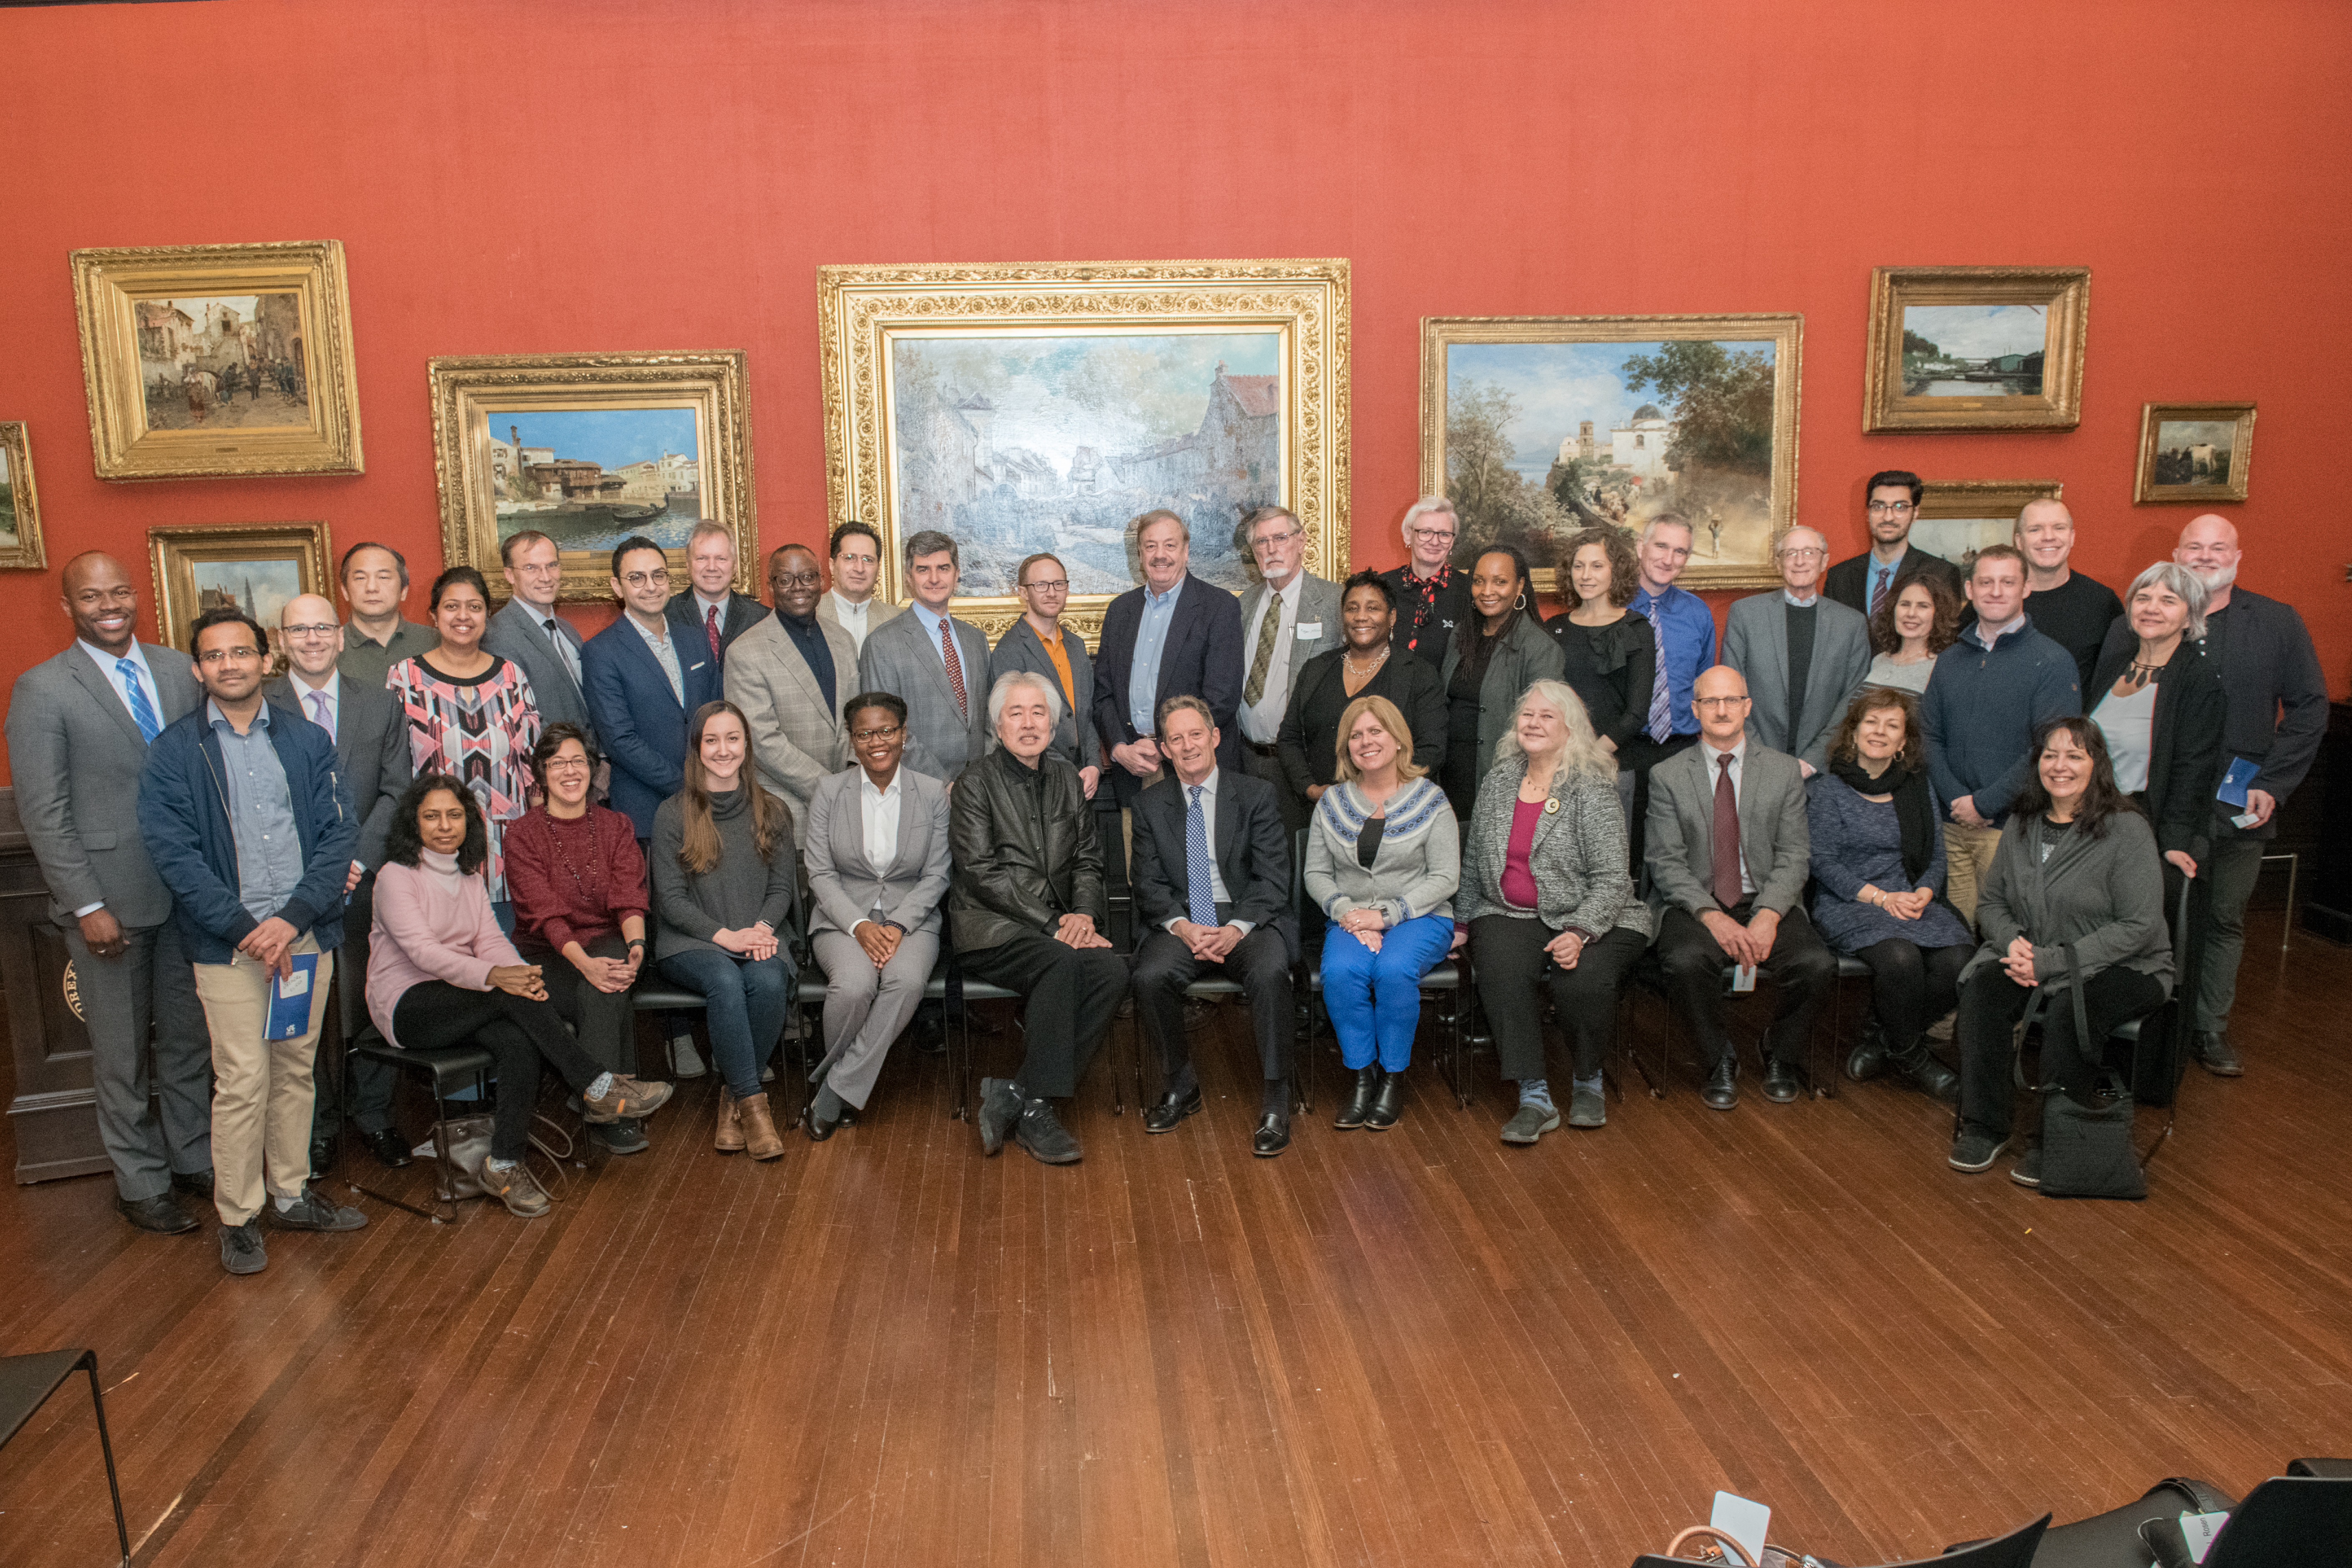 A large group of Drexel faculty, staff and students pose for a photograph in the AJ Drexel Picture Gallery